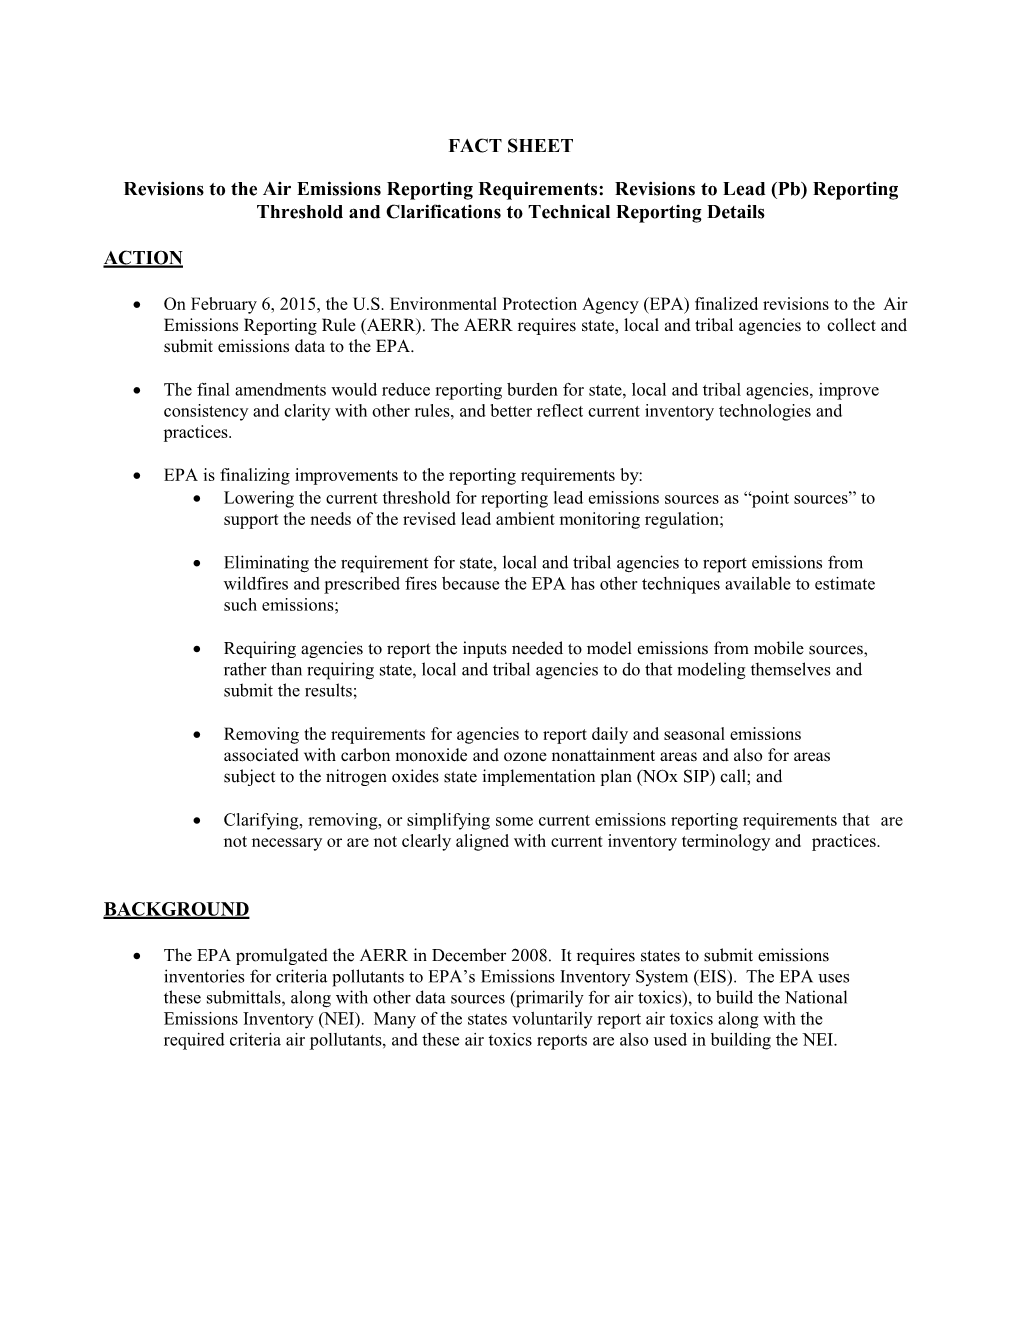 Revisions to the Air Emissions Reporting Requirements: Revisions to Lead (Pb) Reporting